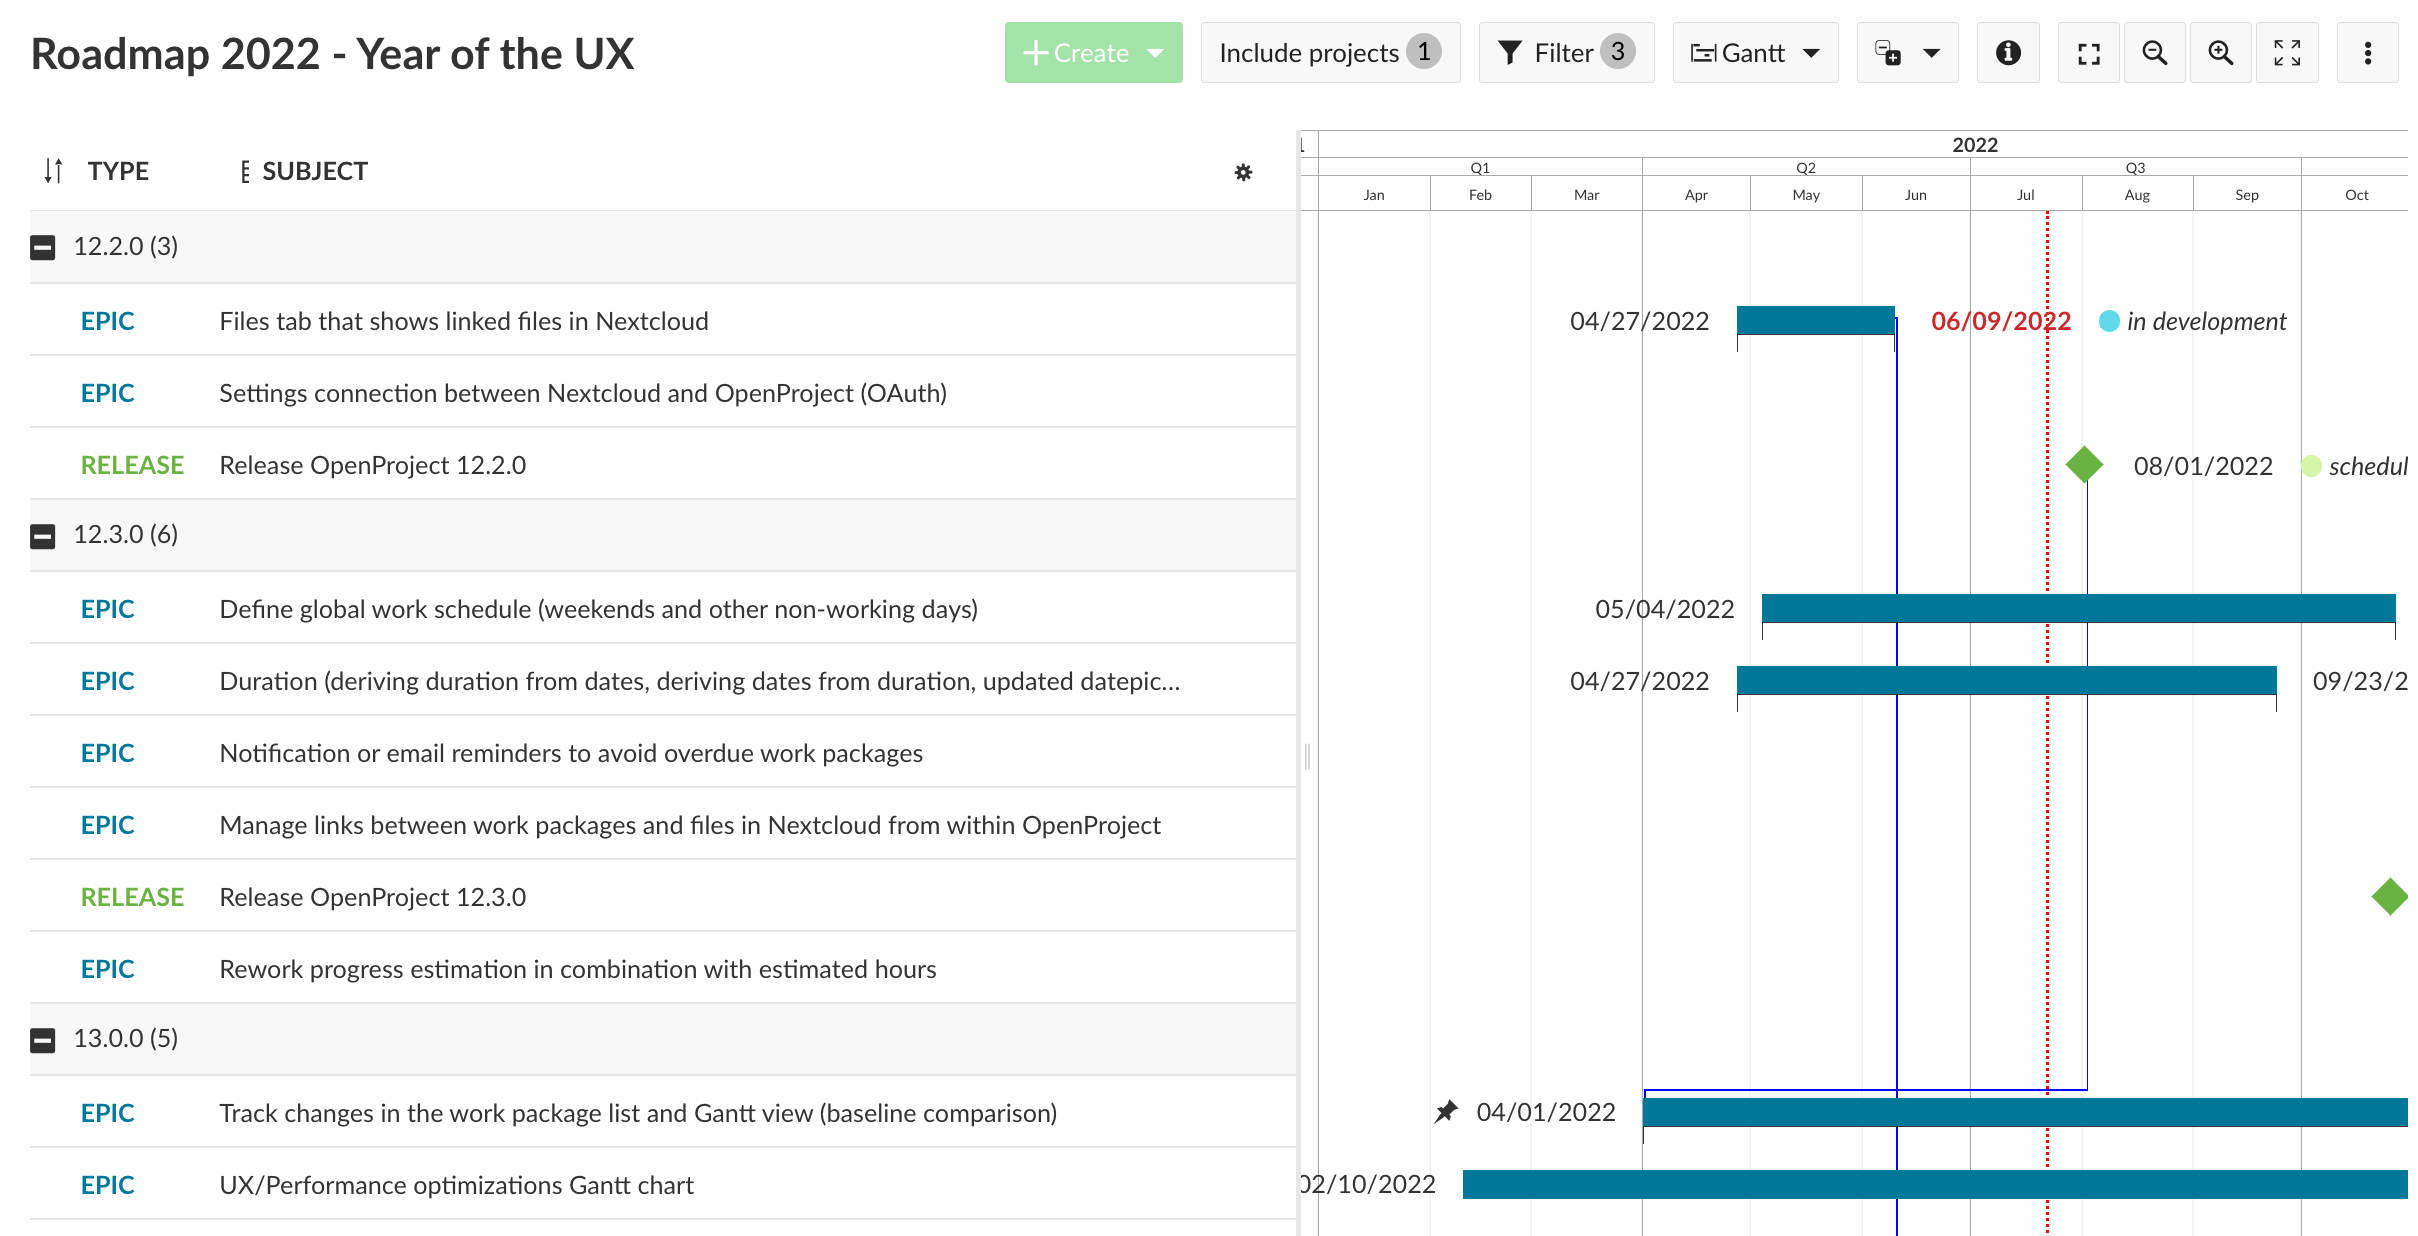 Gantt chart with epics and releases secheduled